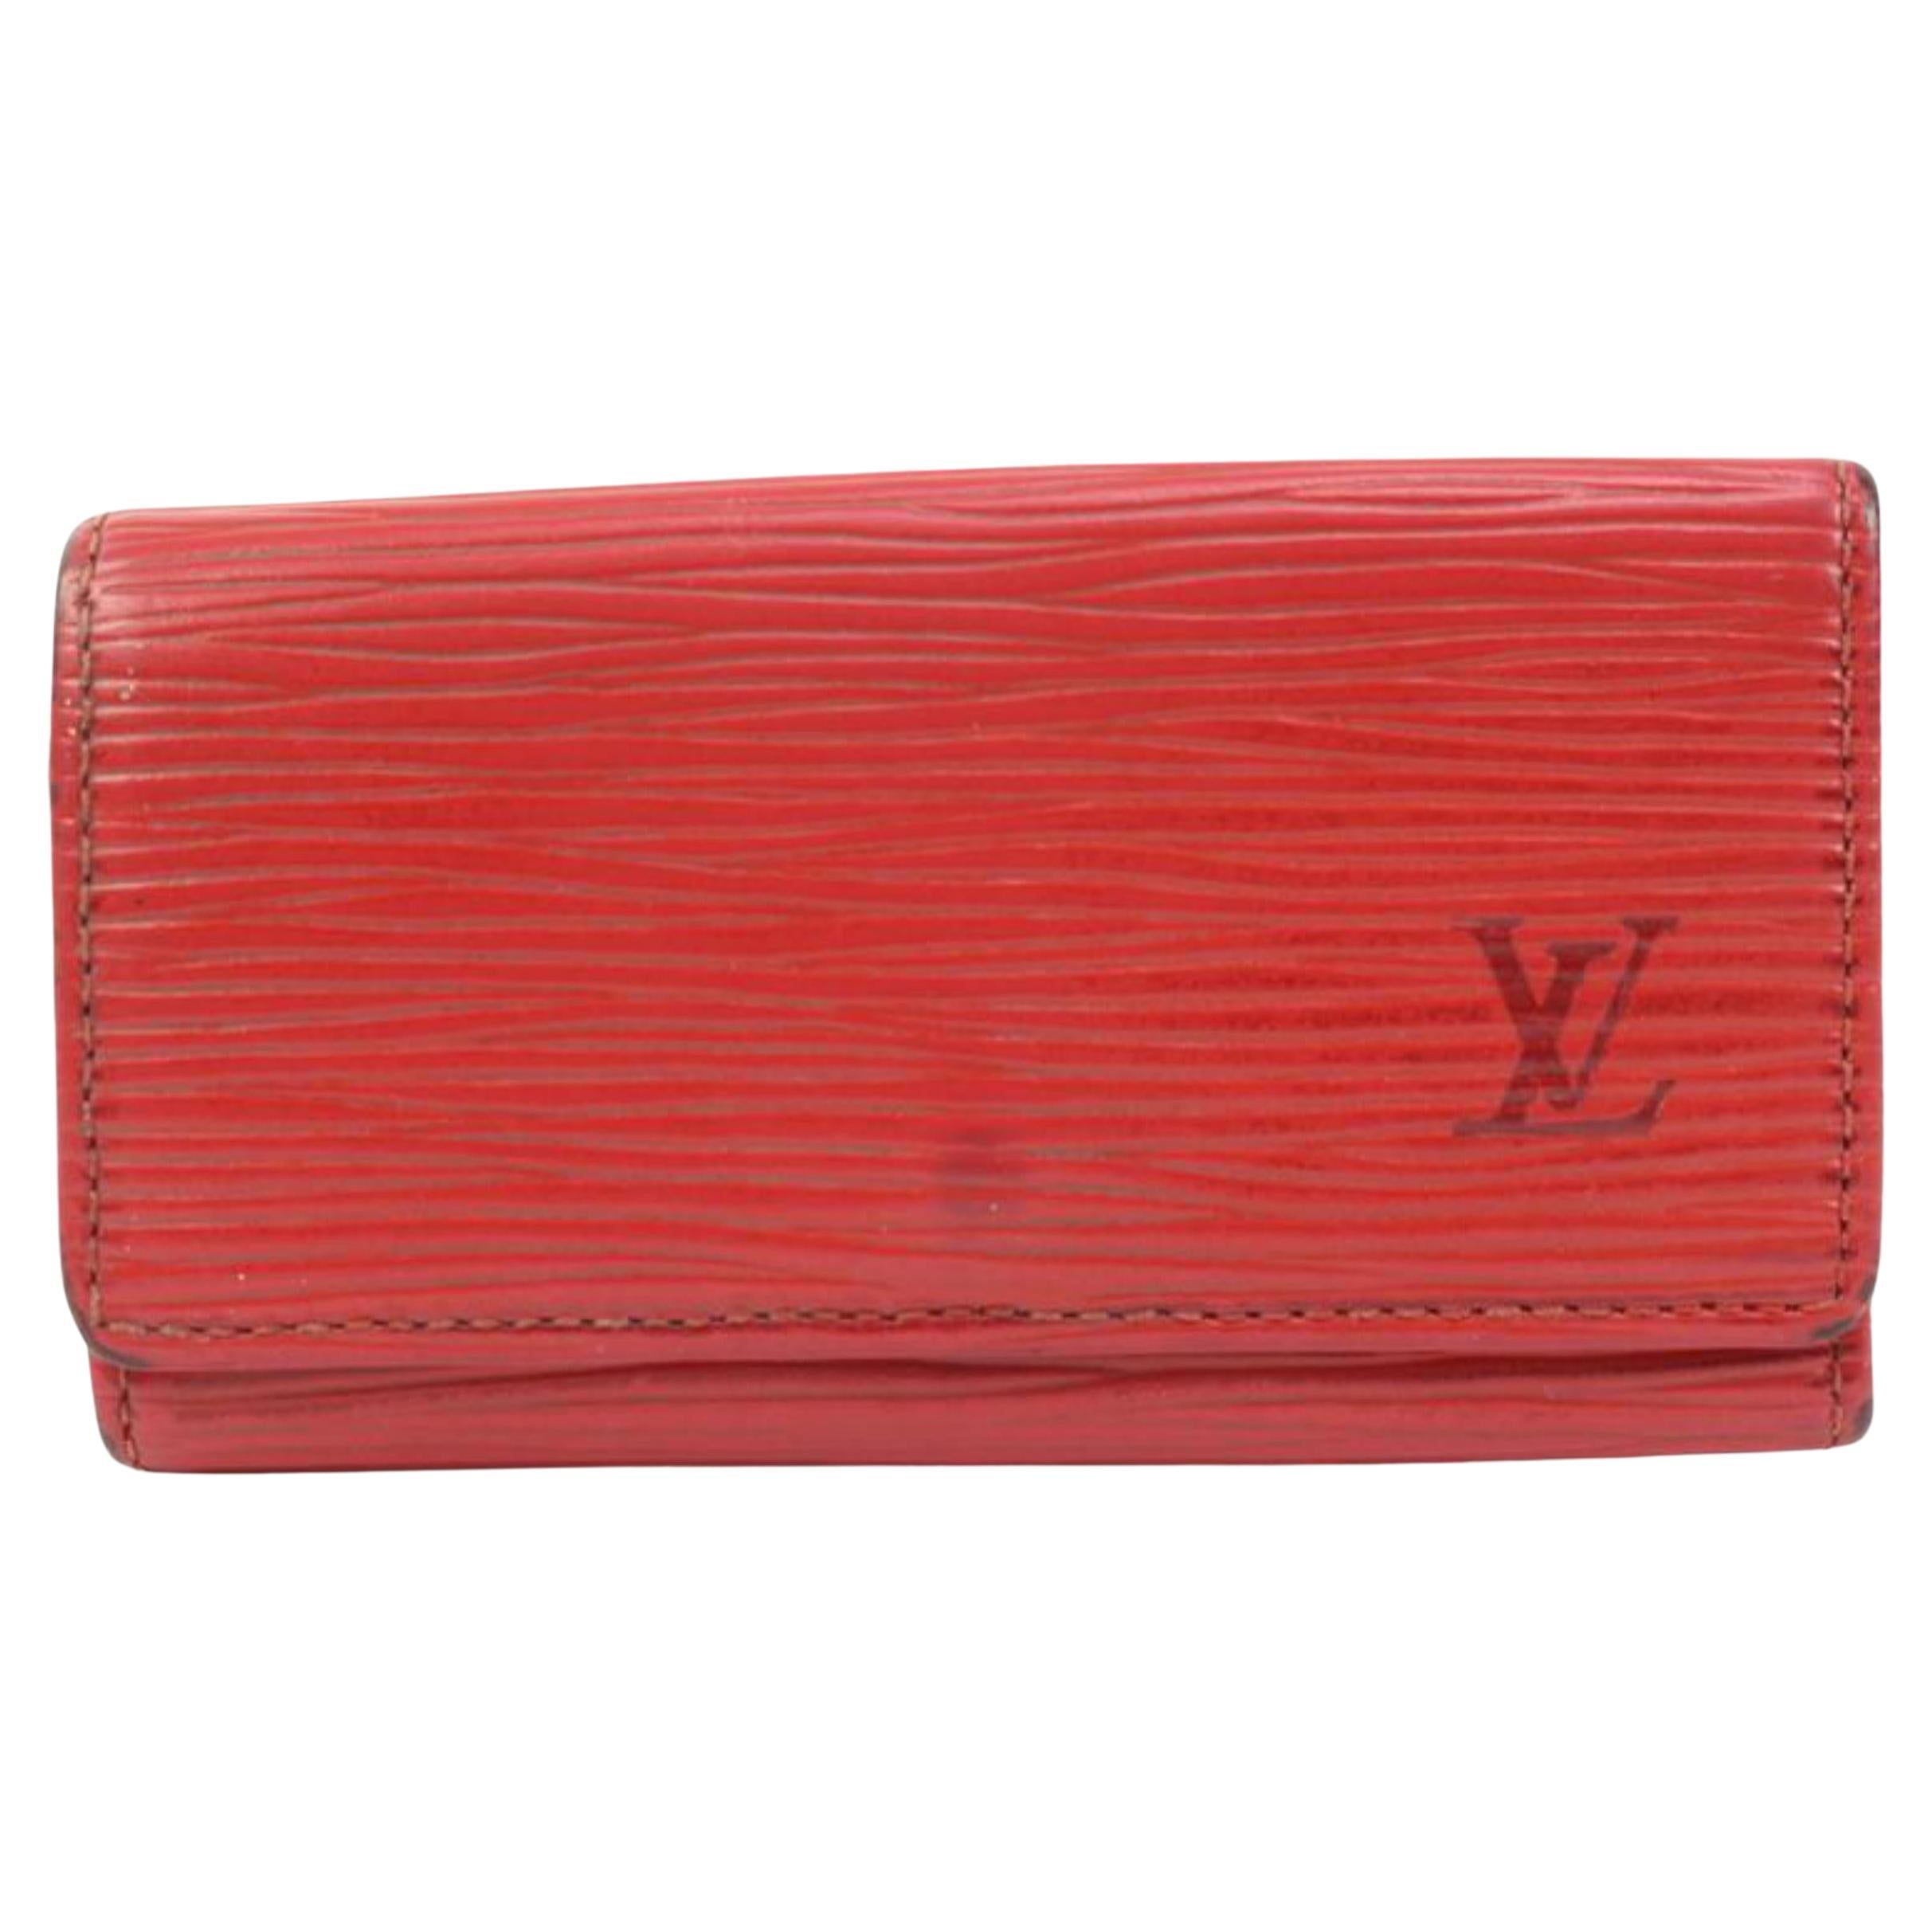 Louis Vuitton Red Epi Leather 4 Key Holder Multicles s330lk29